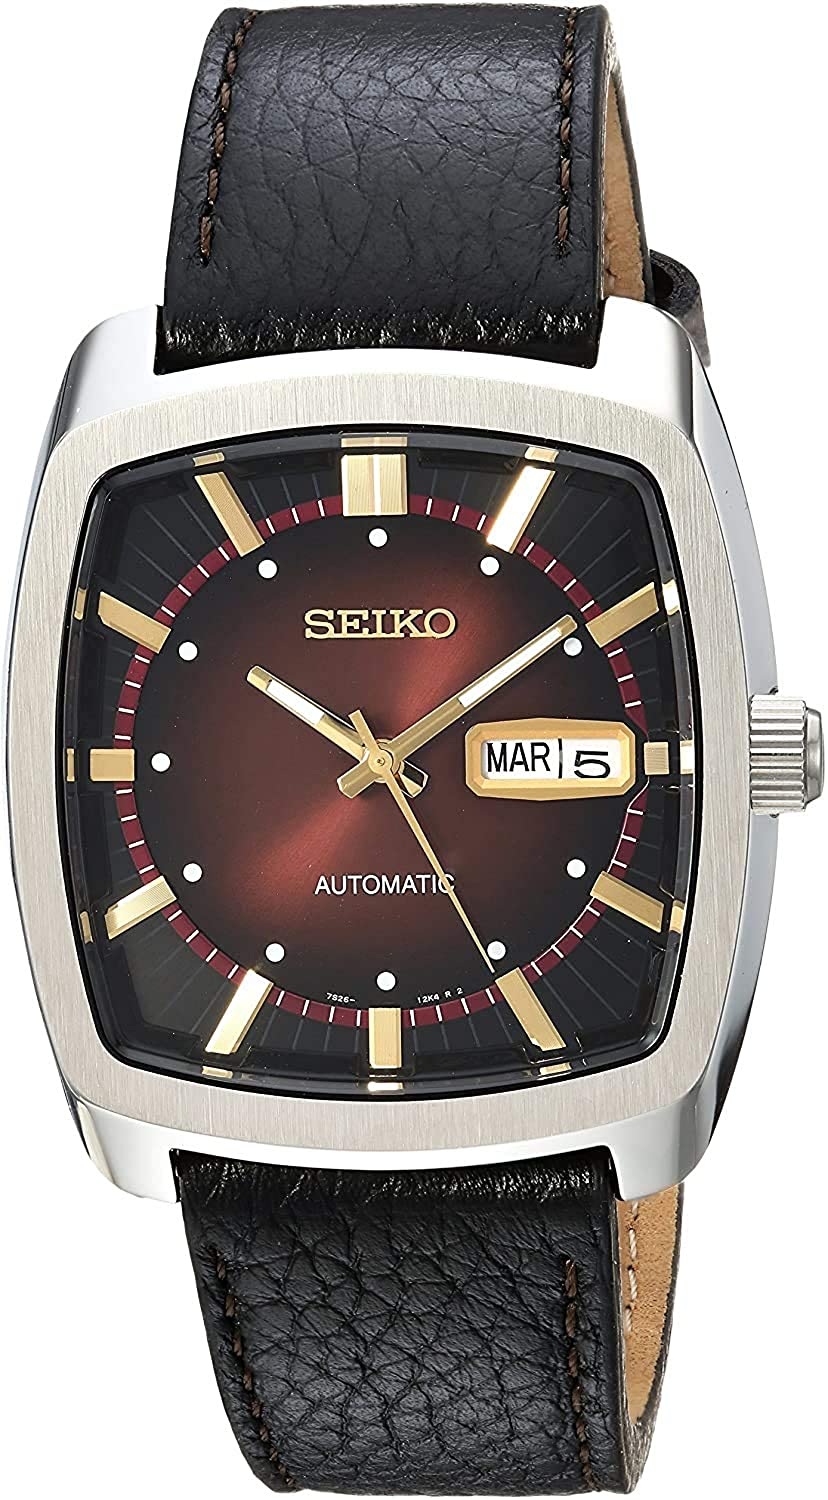 SEIKO Recraft Series Automatic winding SNKP25 - Discovery Japan Mall